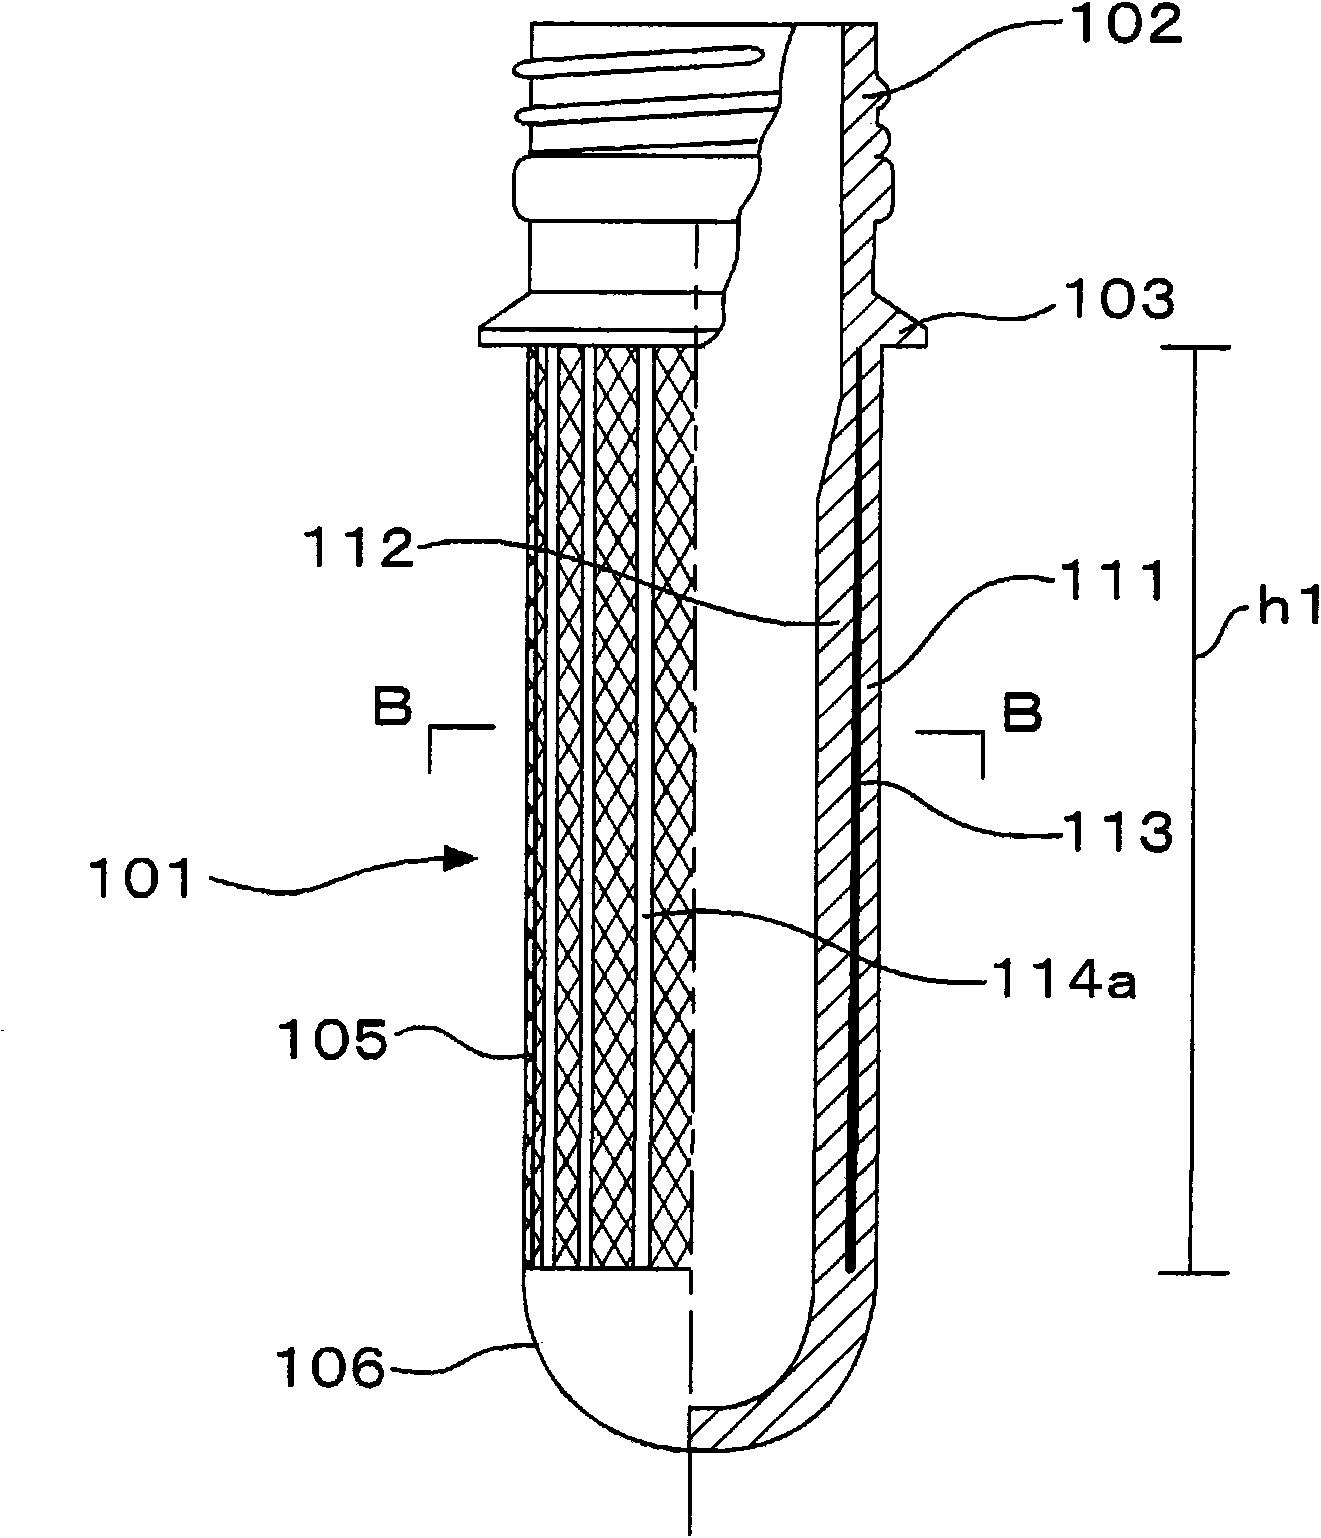 Synthetic-resin laminated bottle body, injection molding device and method for forming laminated preform